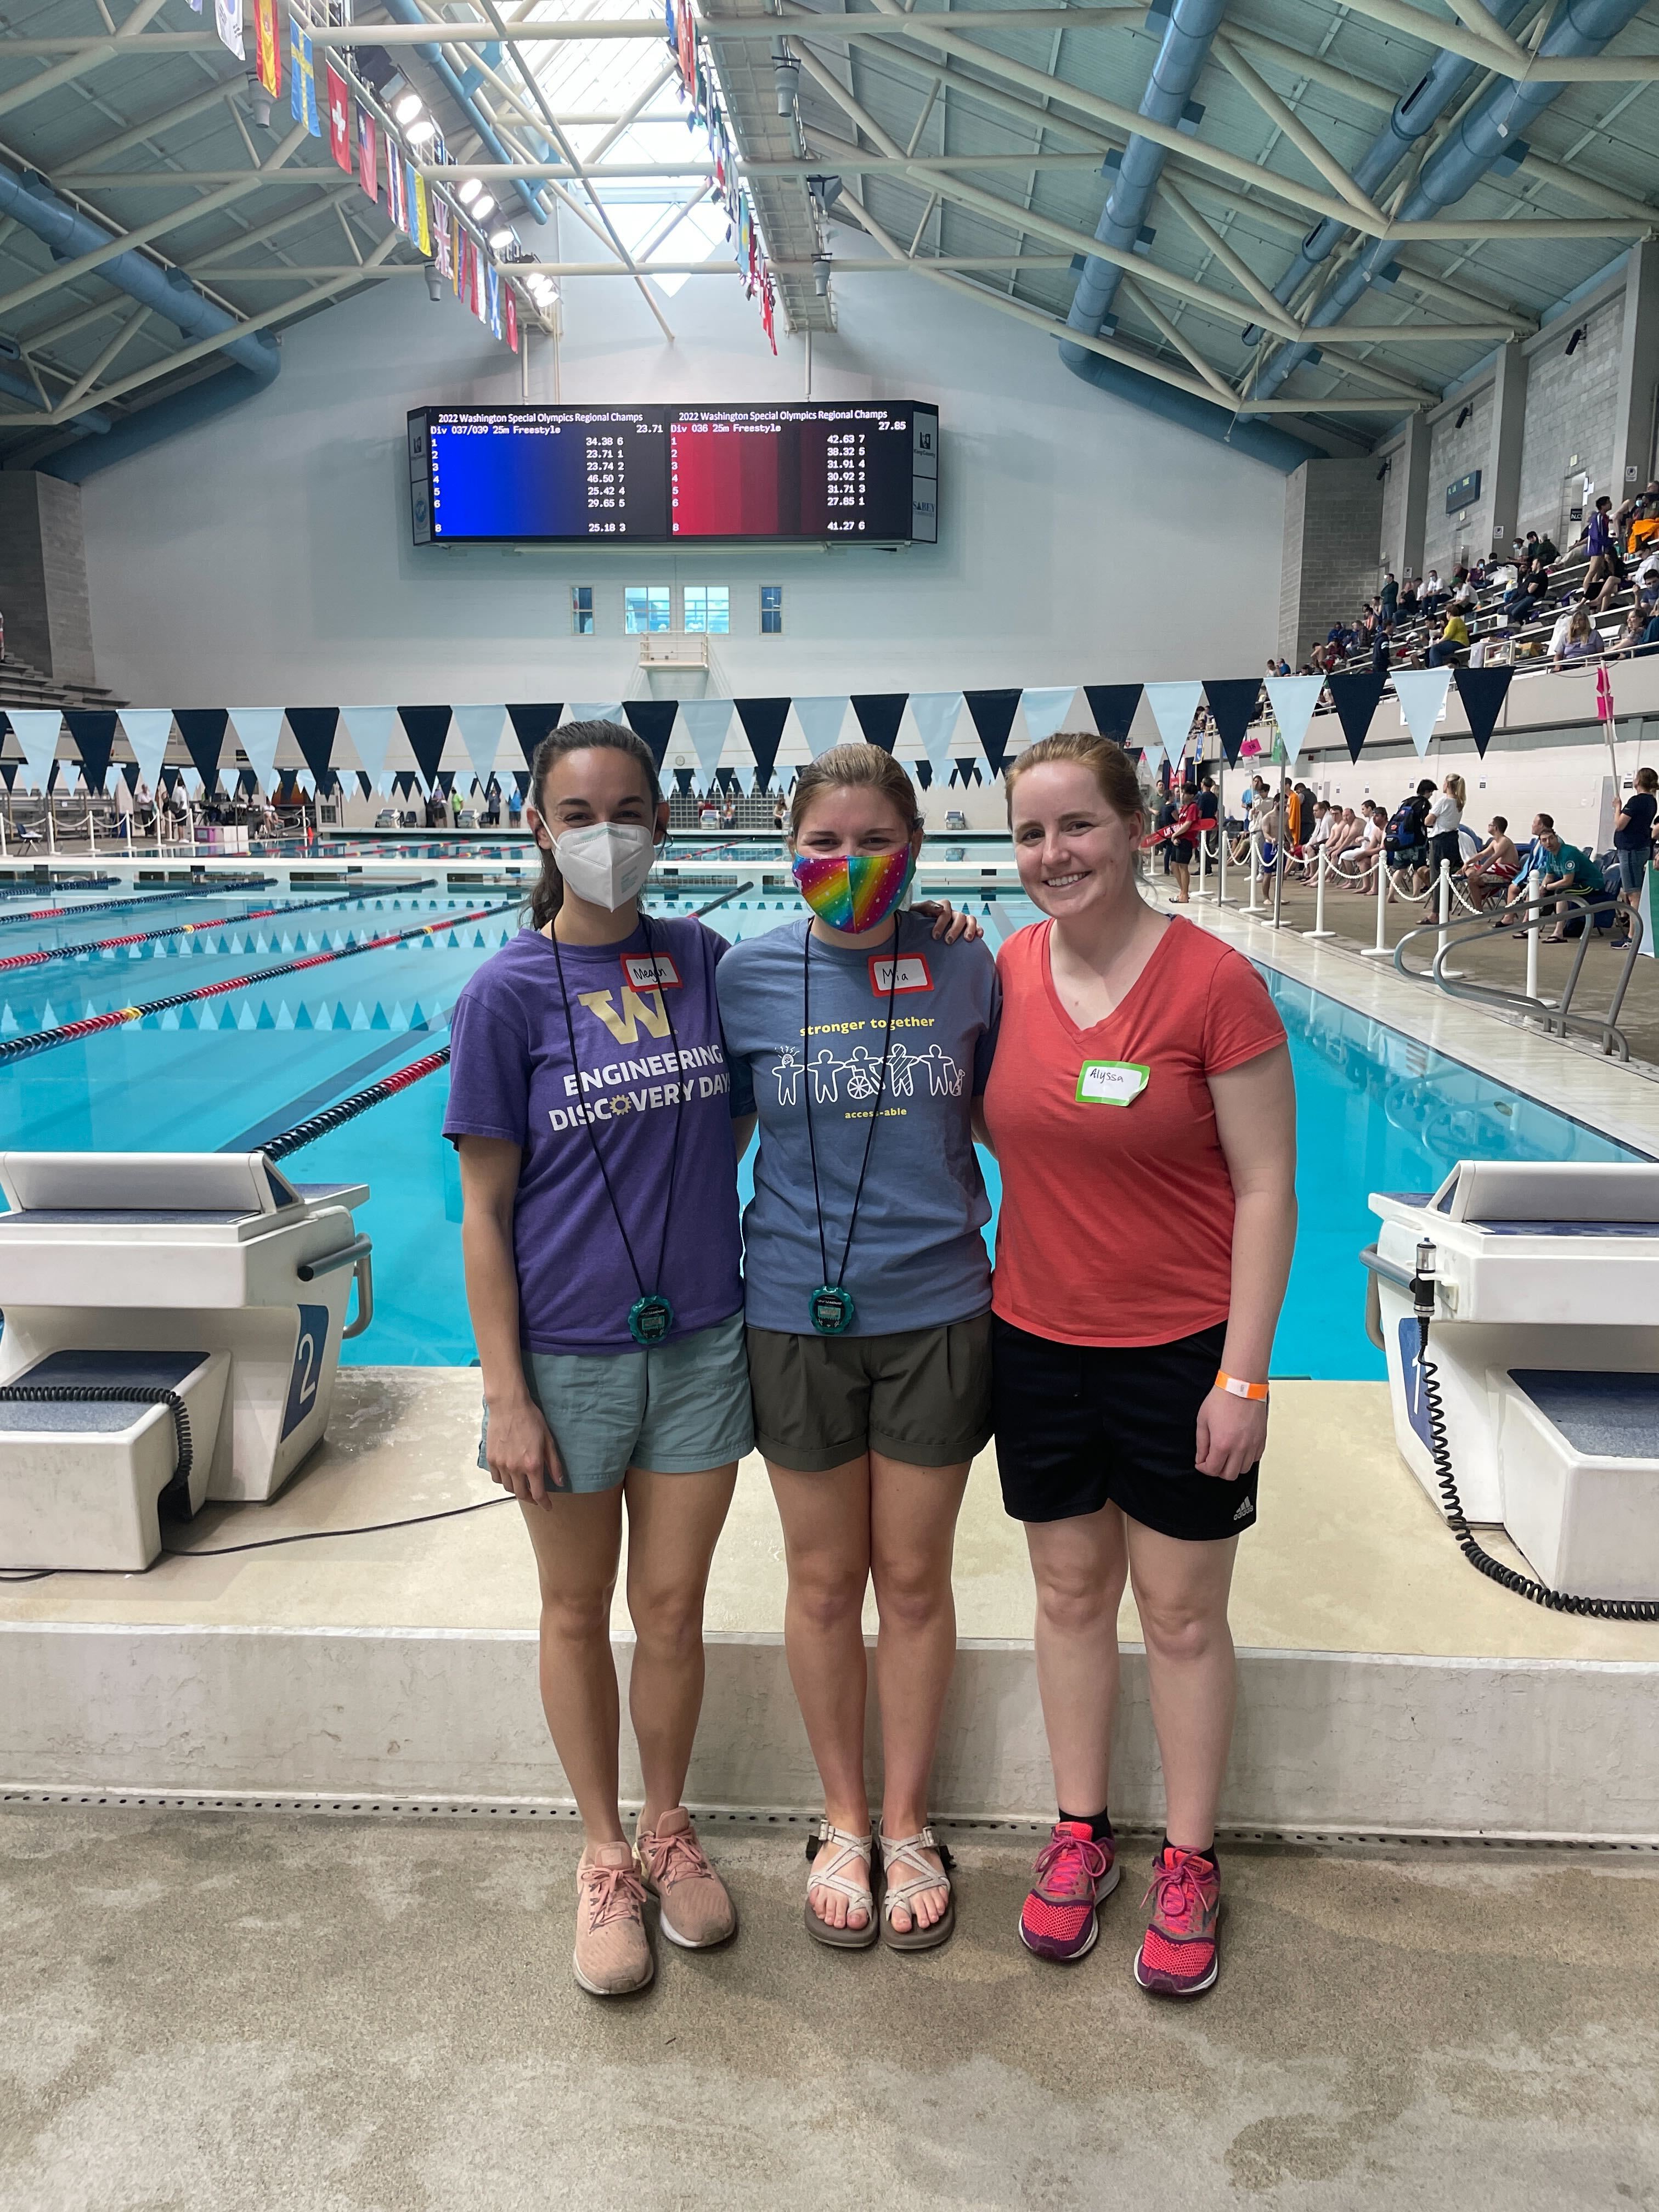 Megan, Mia, and Alyssa are standing in front of a pool with flags above wearing bright shirts.